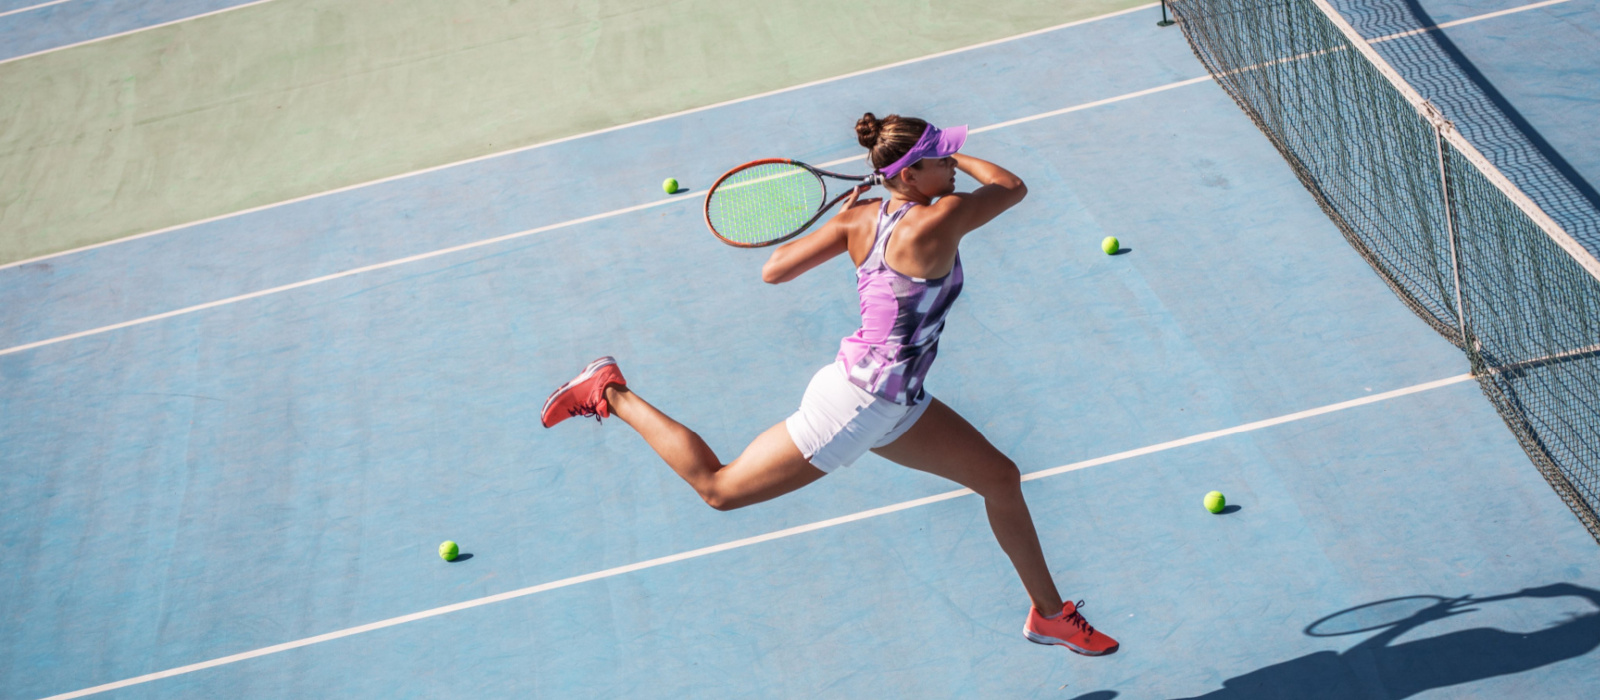 tennis-athlete-treatment-with-prp